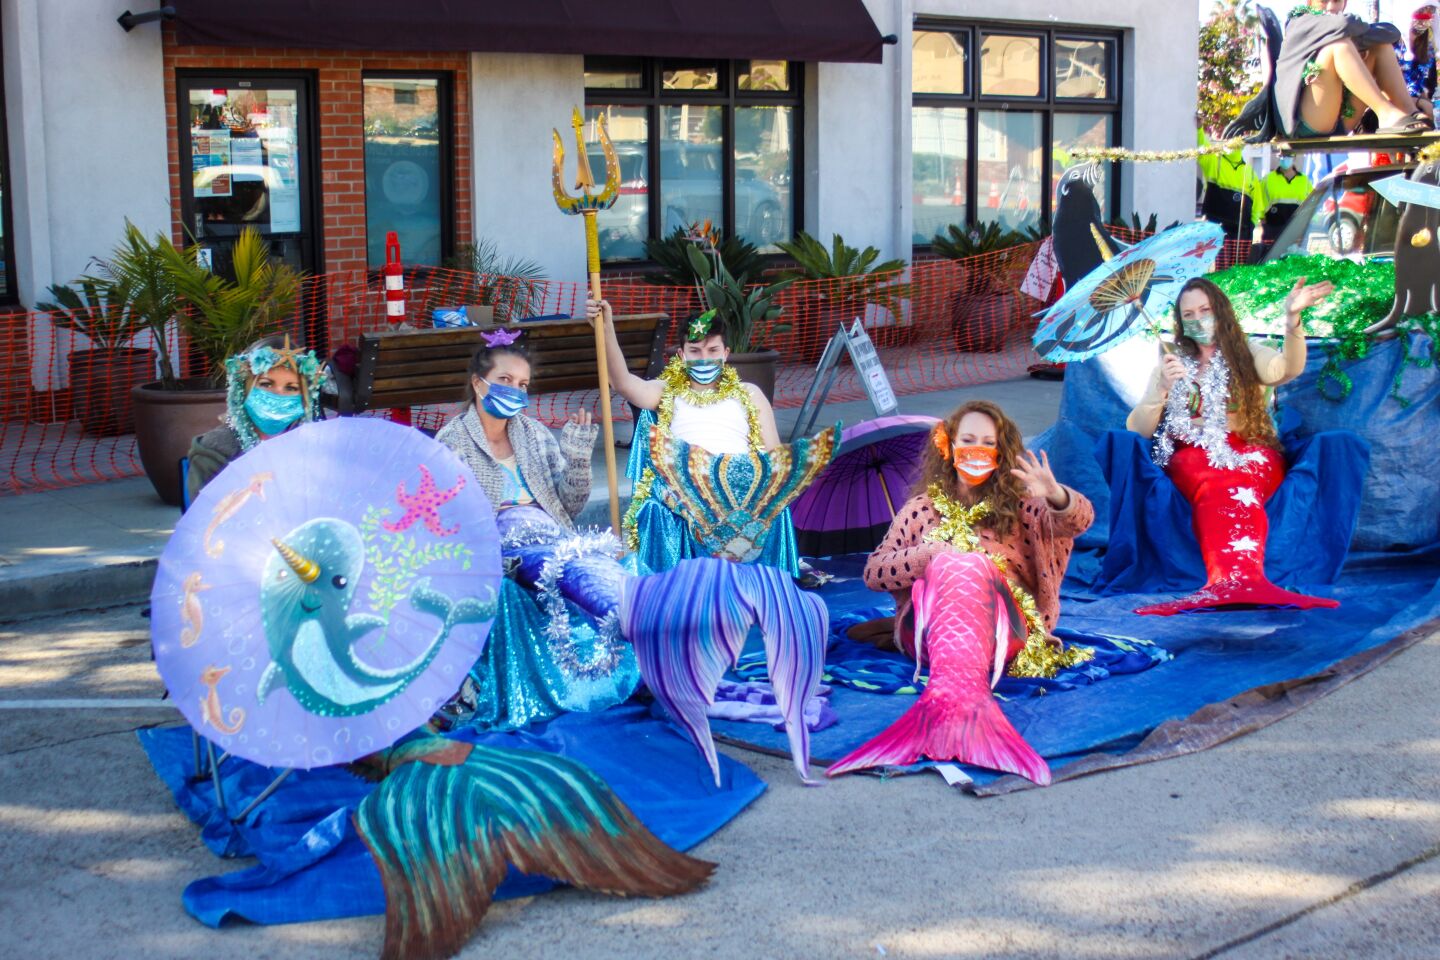 Mermaids from Erling Rohde Plumbing send holiday wishes to parade passersby.